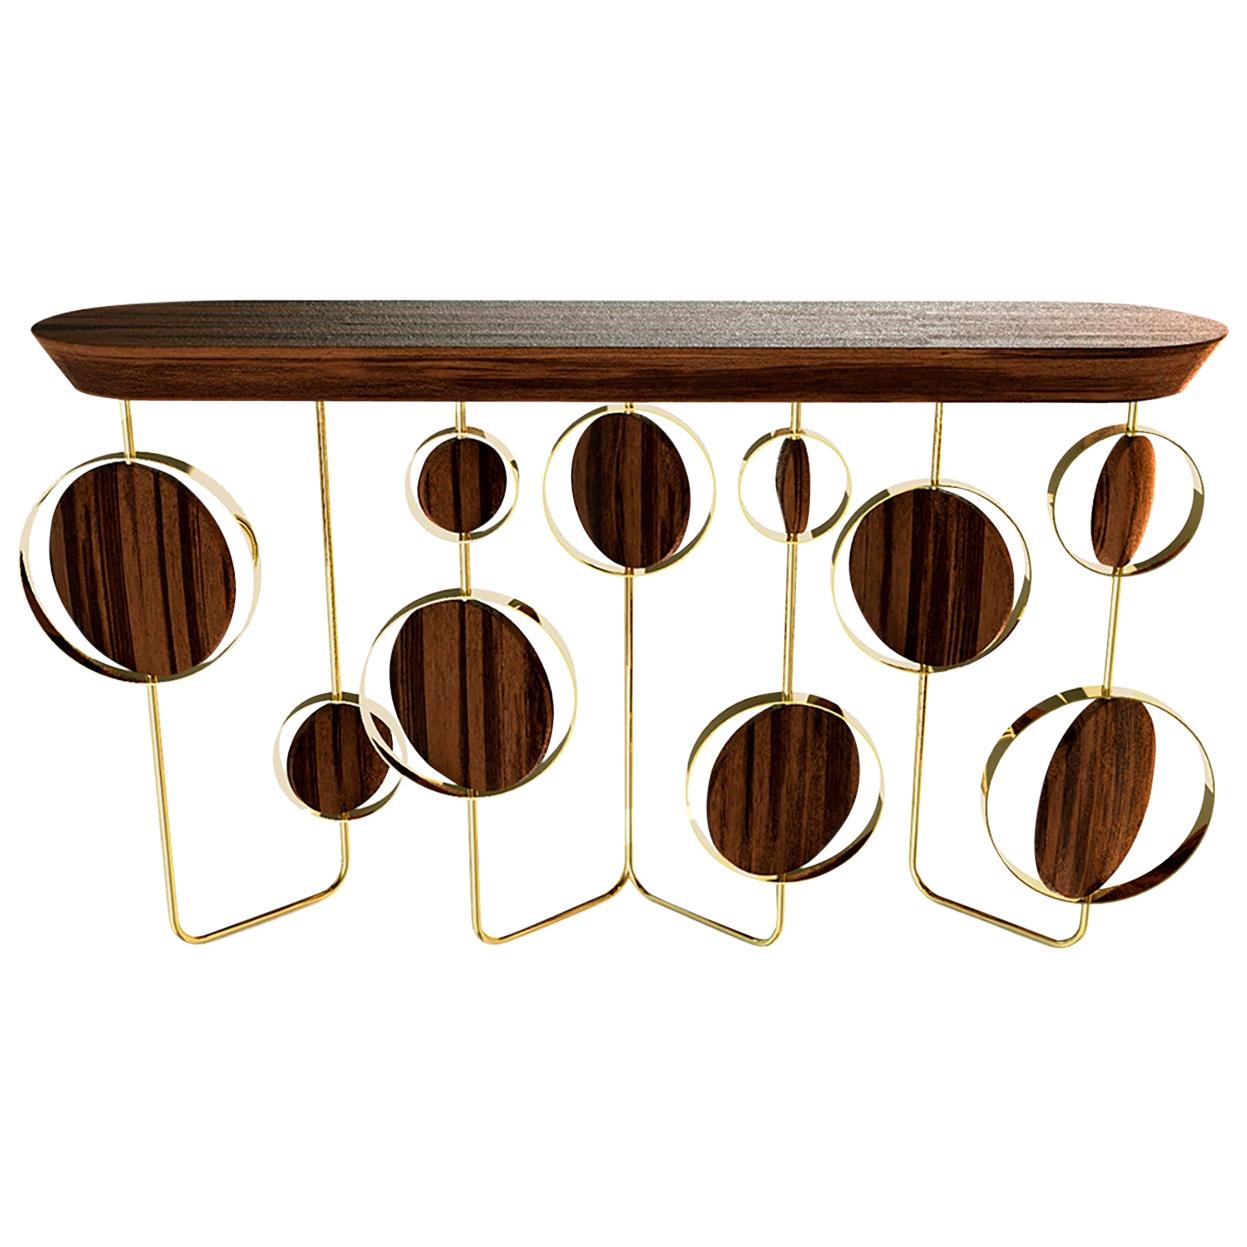 Luxury "Circle" Contemporary Modern Console Table in Walnut, Wood & Brass